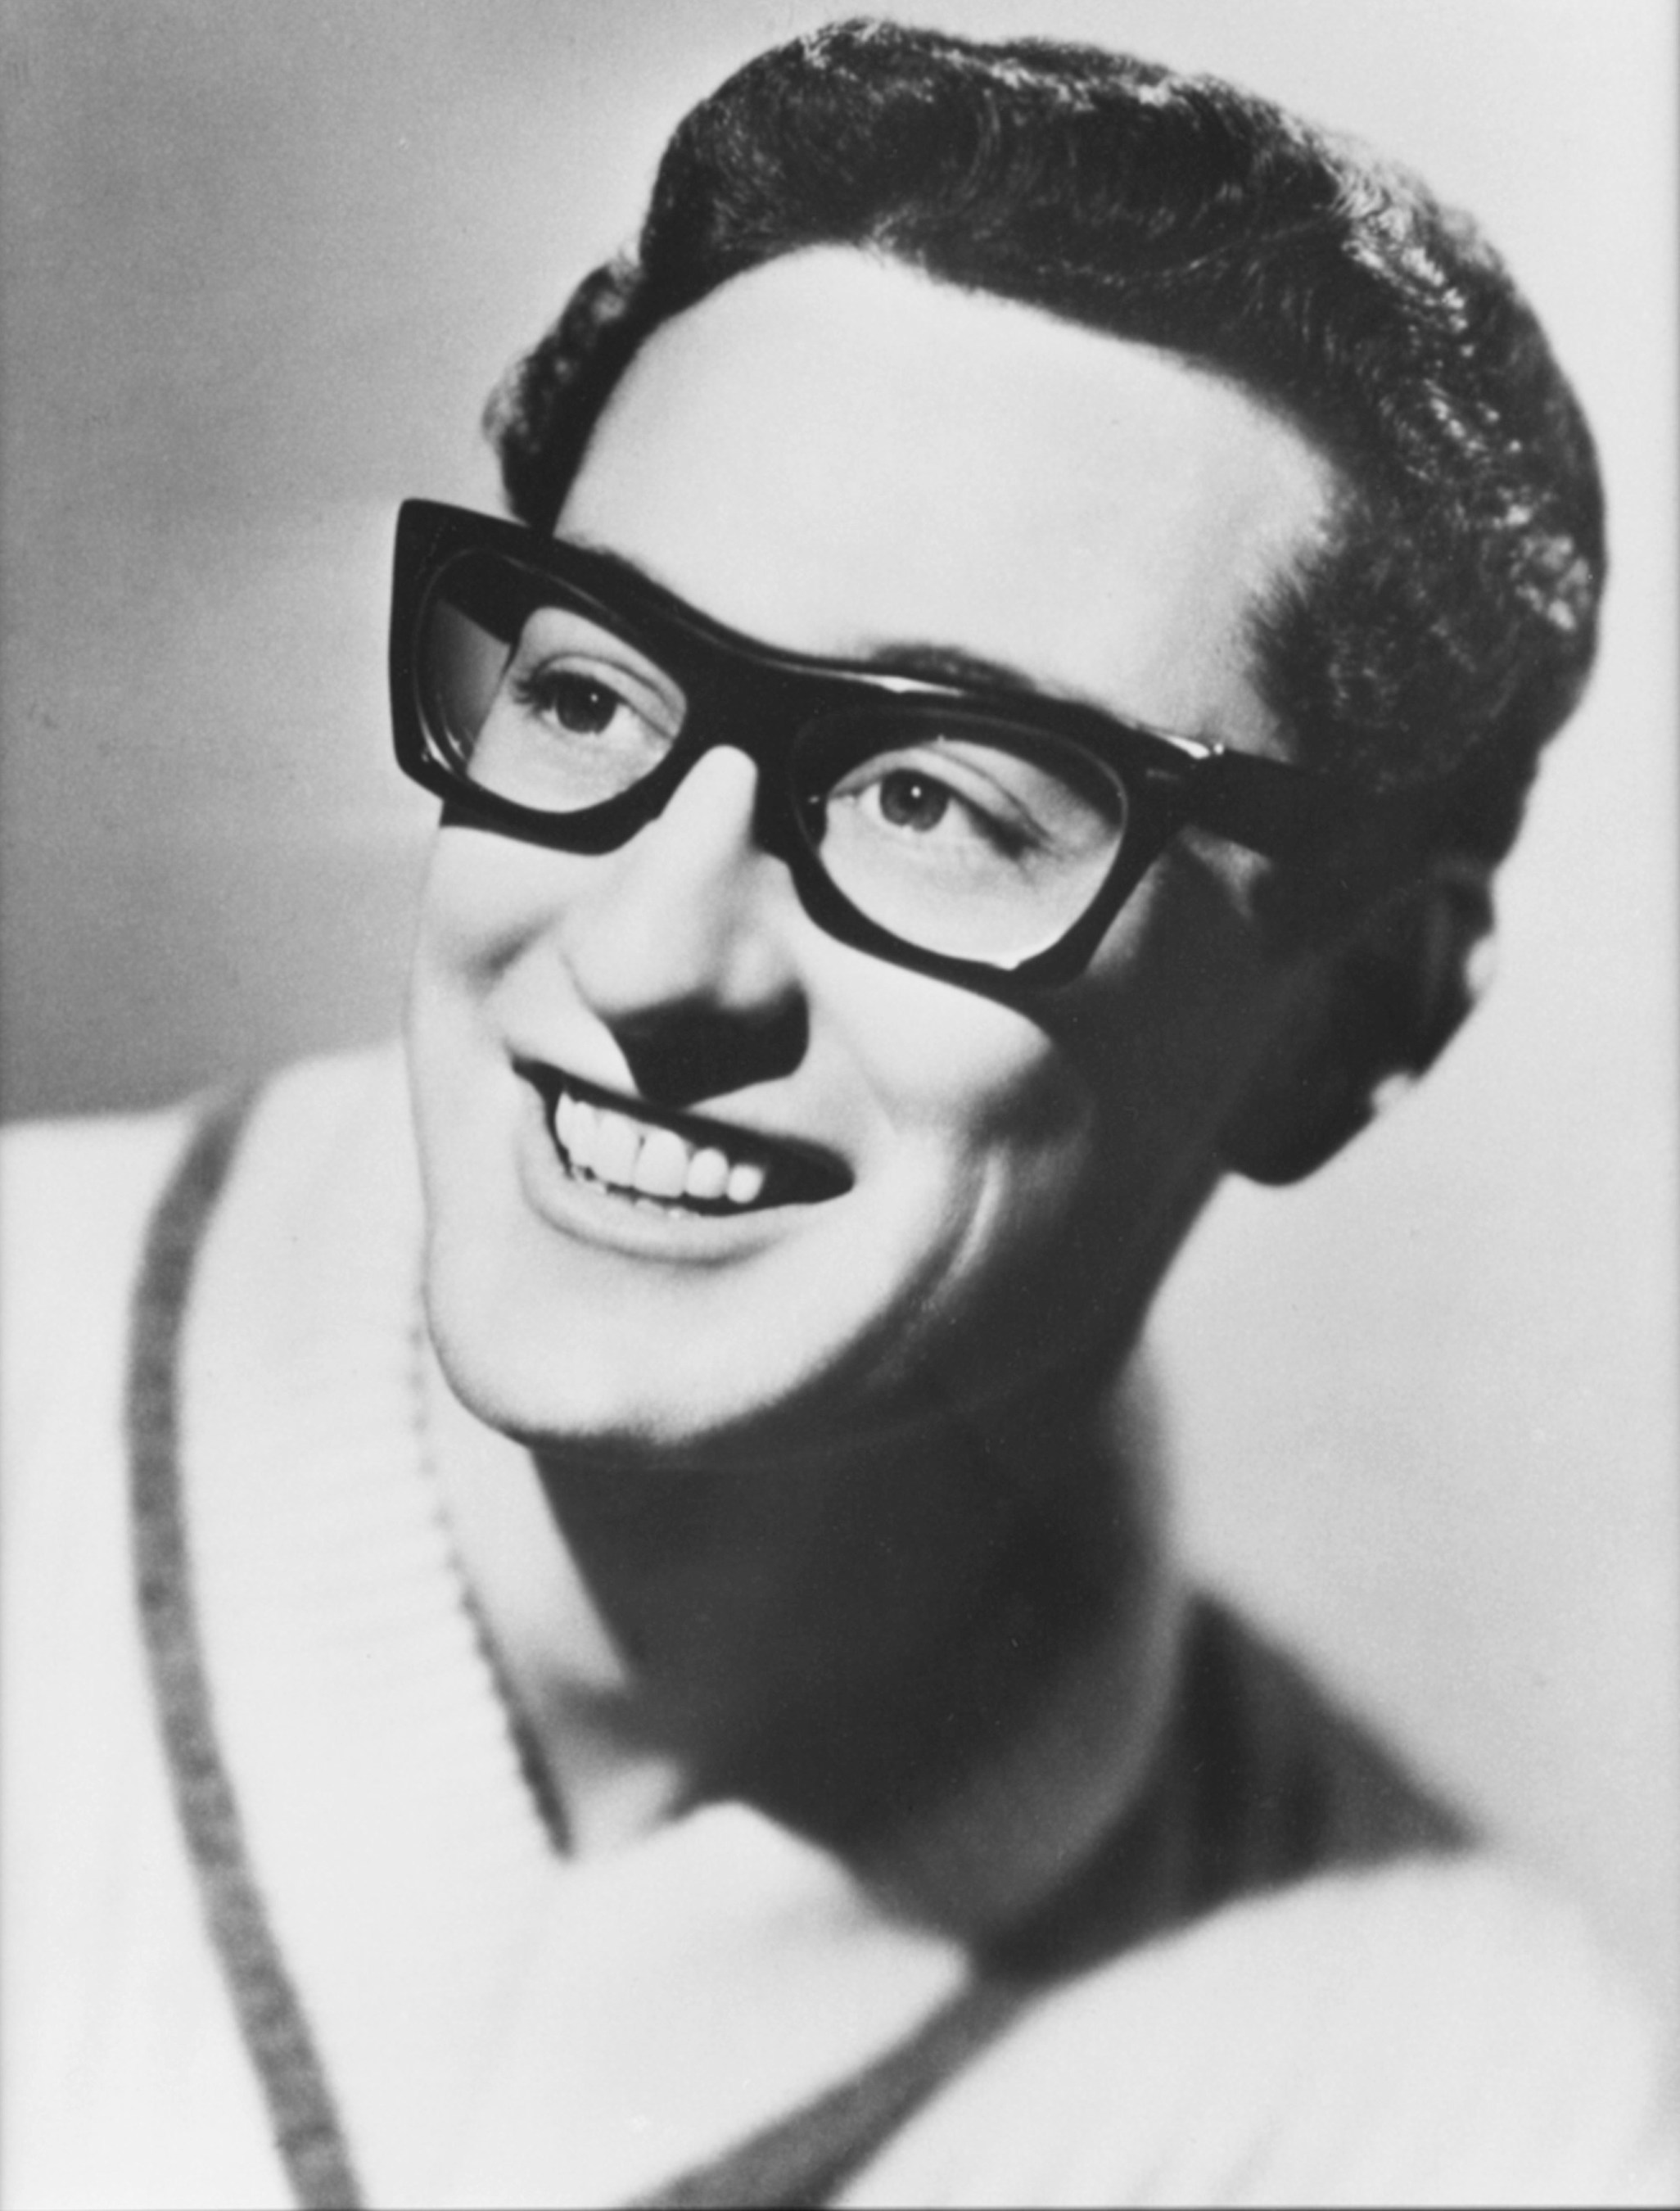 Was buddy holly bisexual